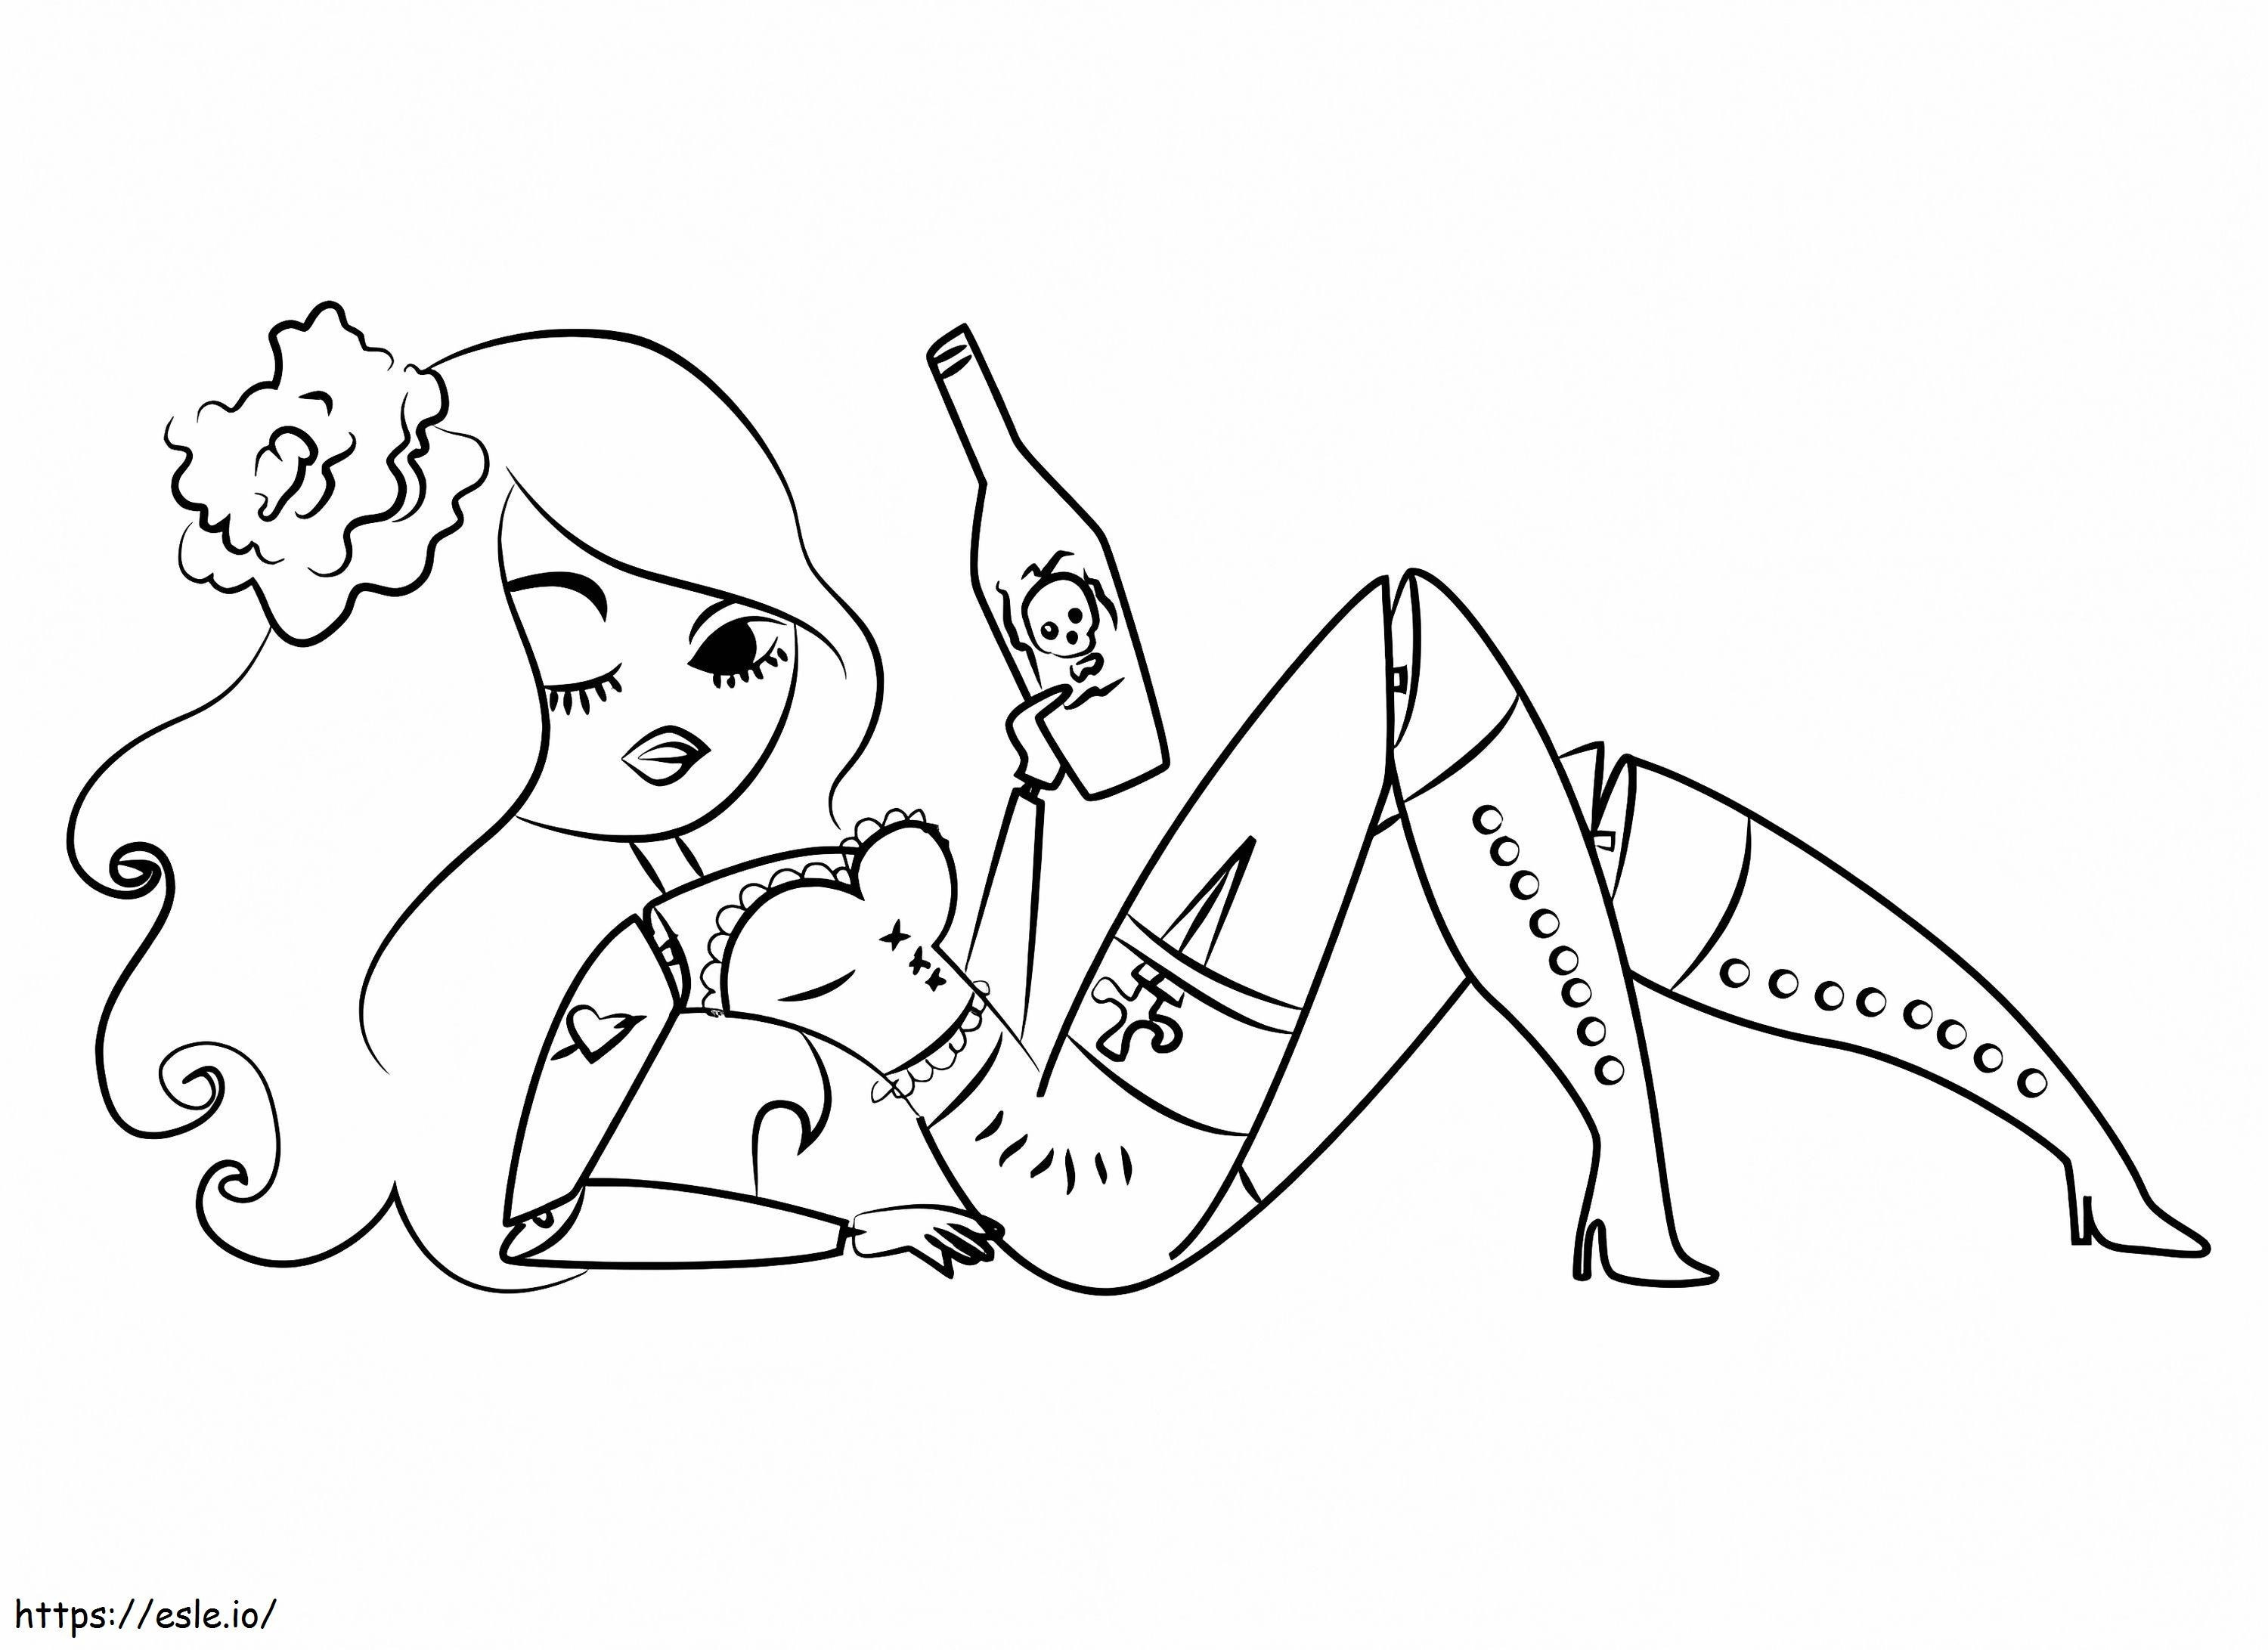 Chela From The Book Of Life coloring page